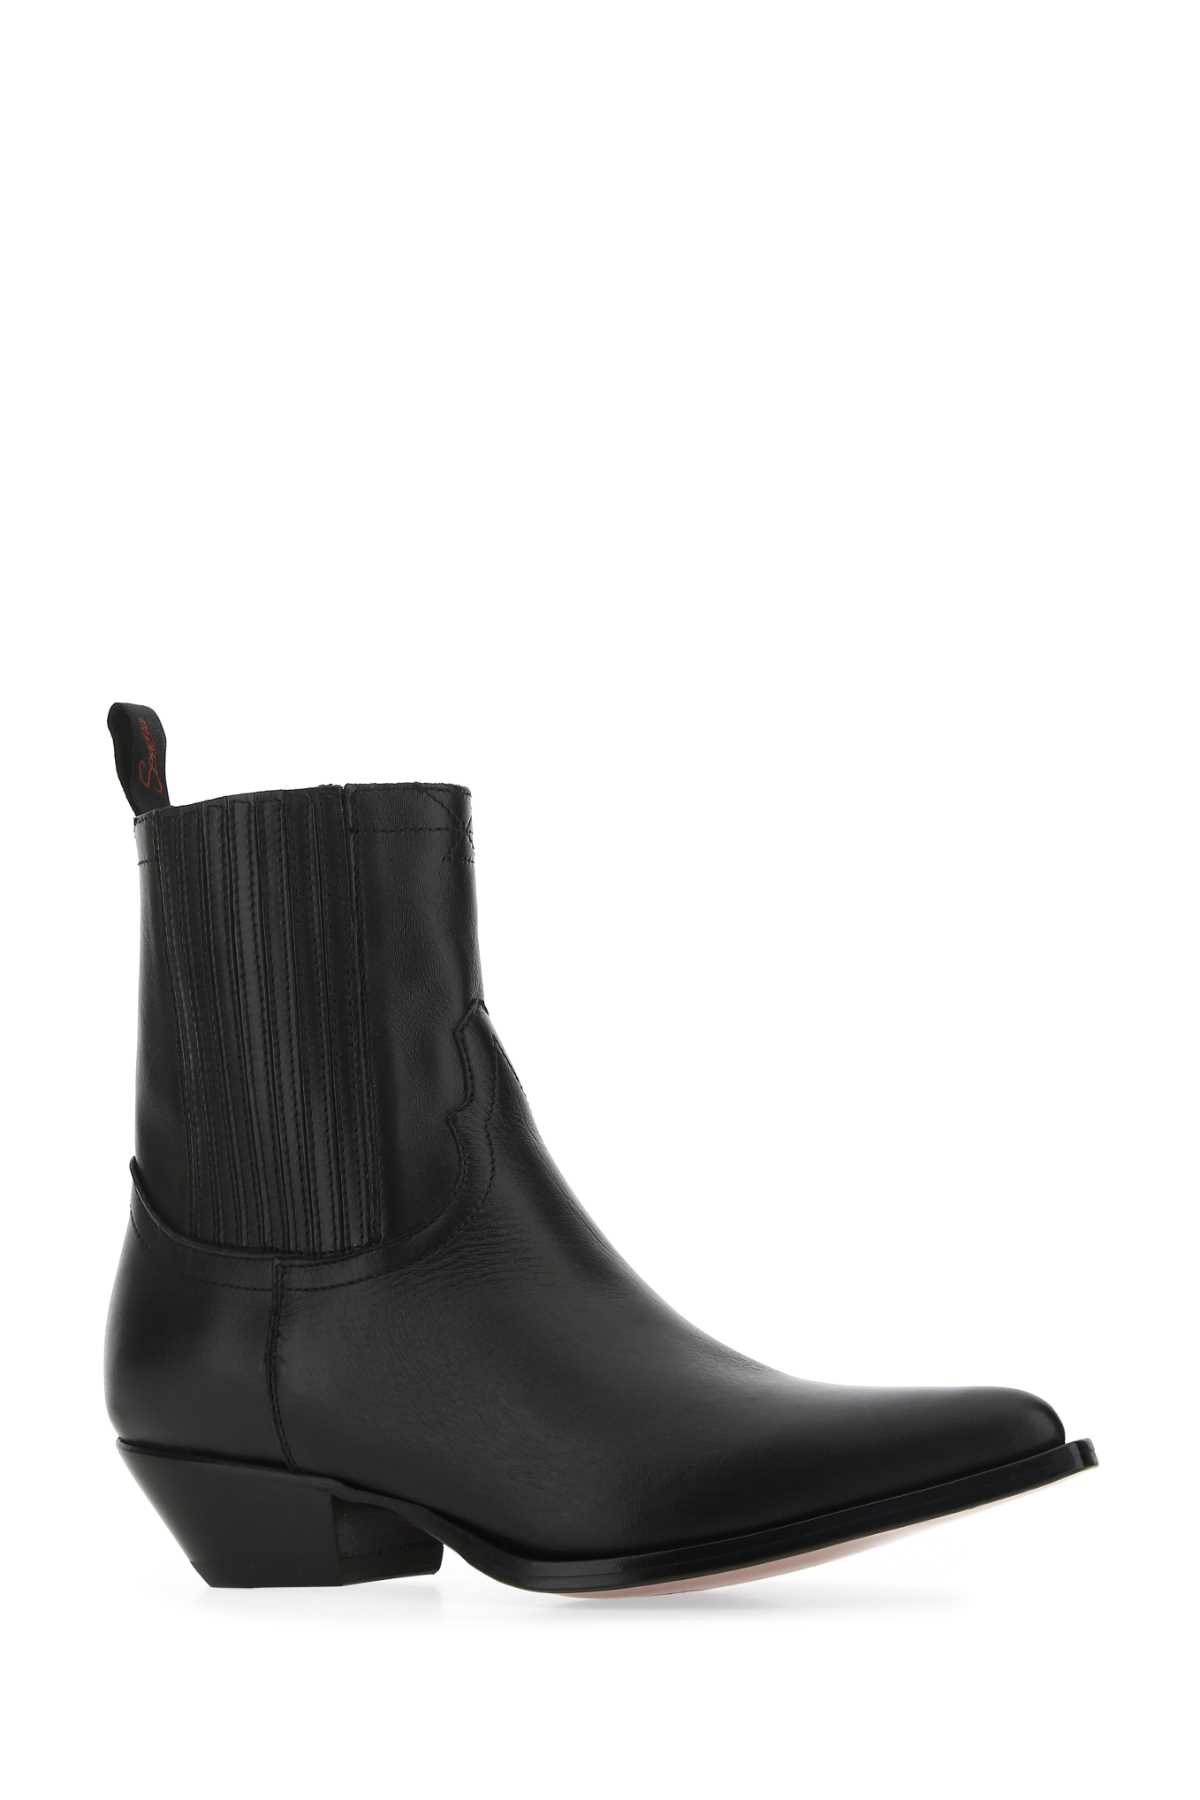 SONORA BLACK LEATHER HIDALGO ANKLE BOOTS